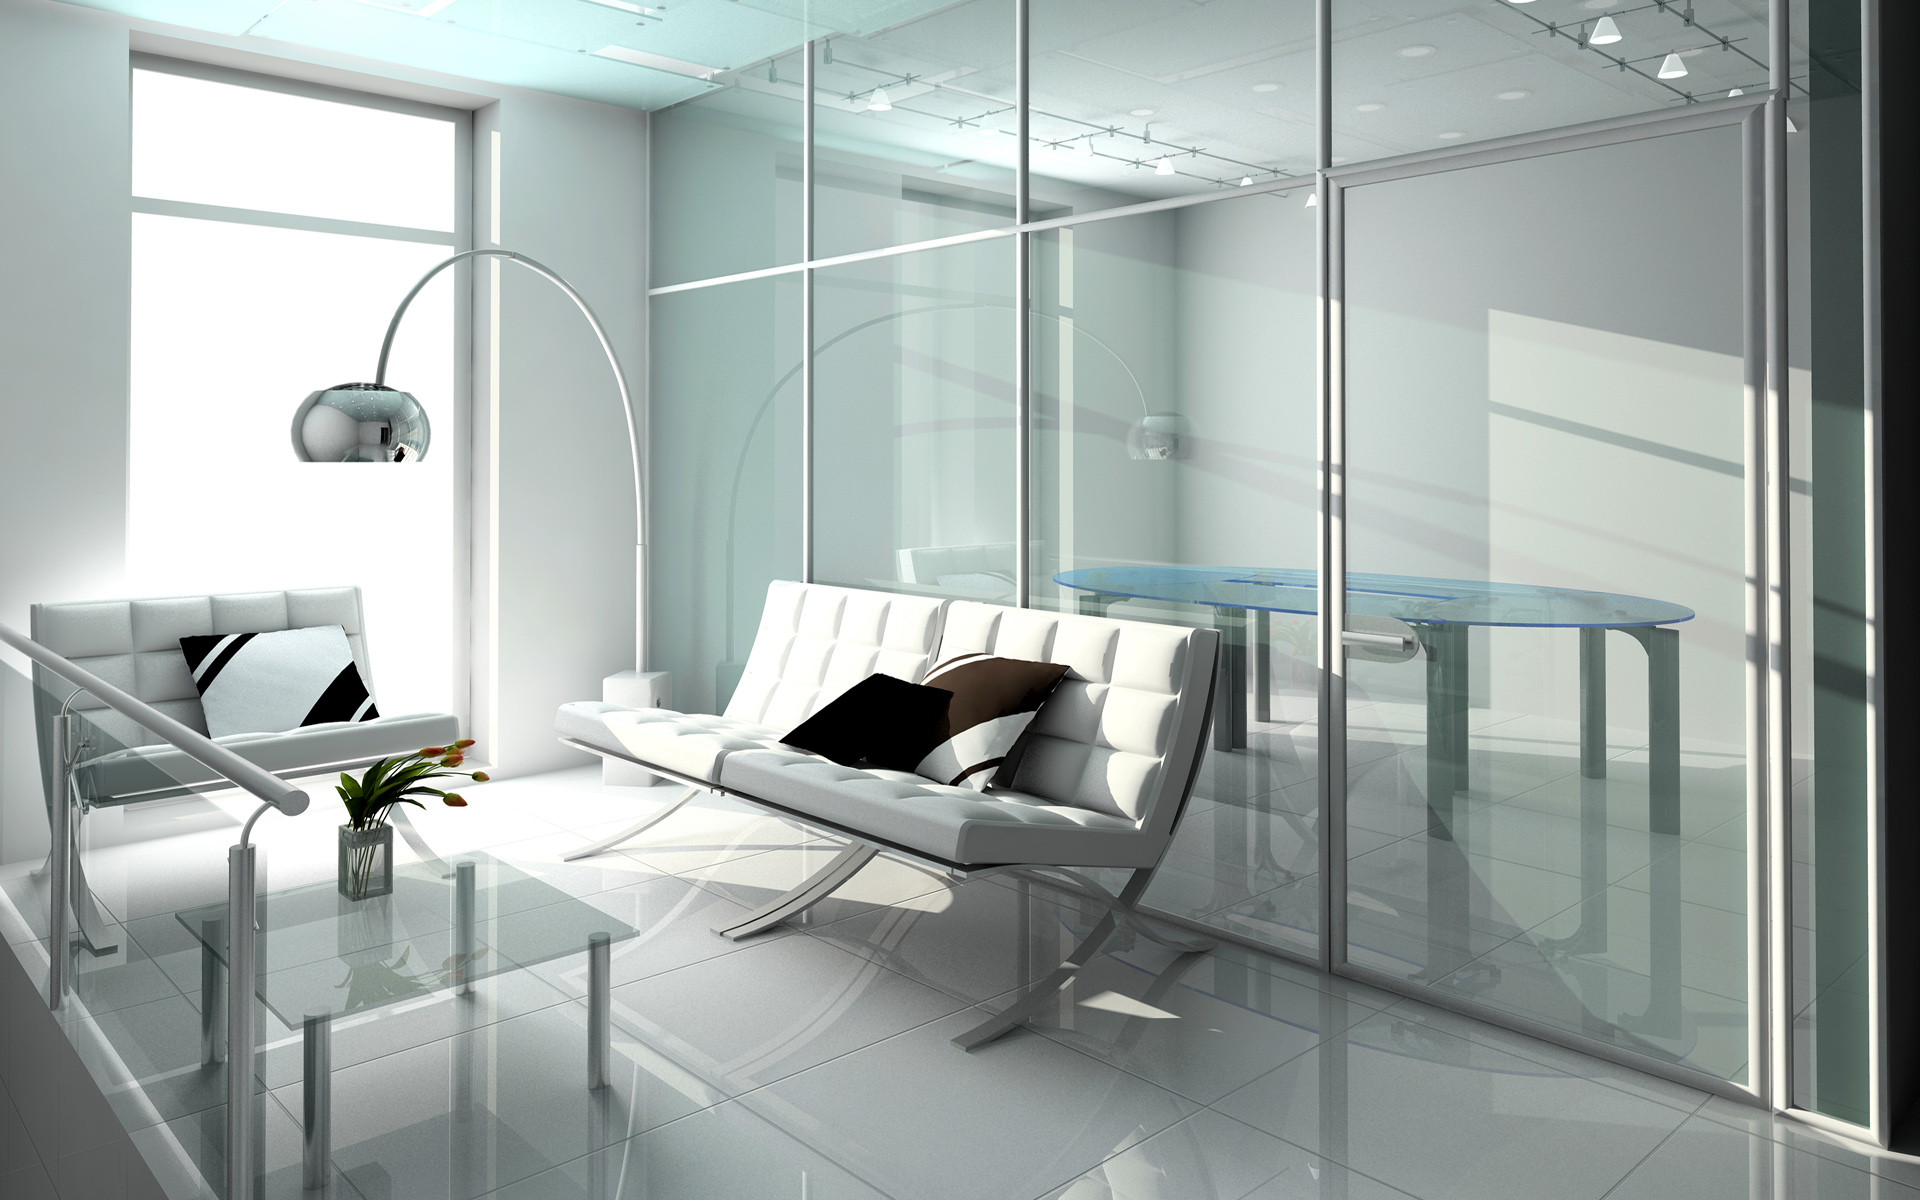 Small Office Waiting Room Design - HD Wallpaper 